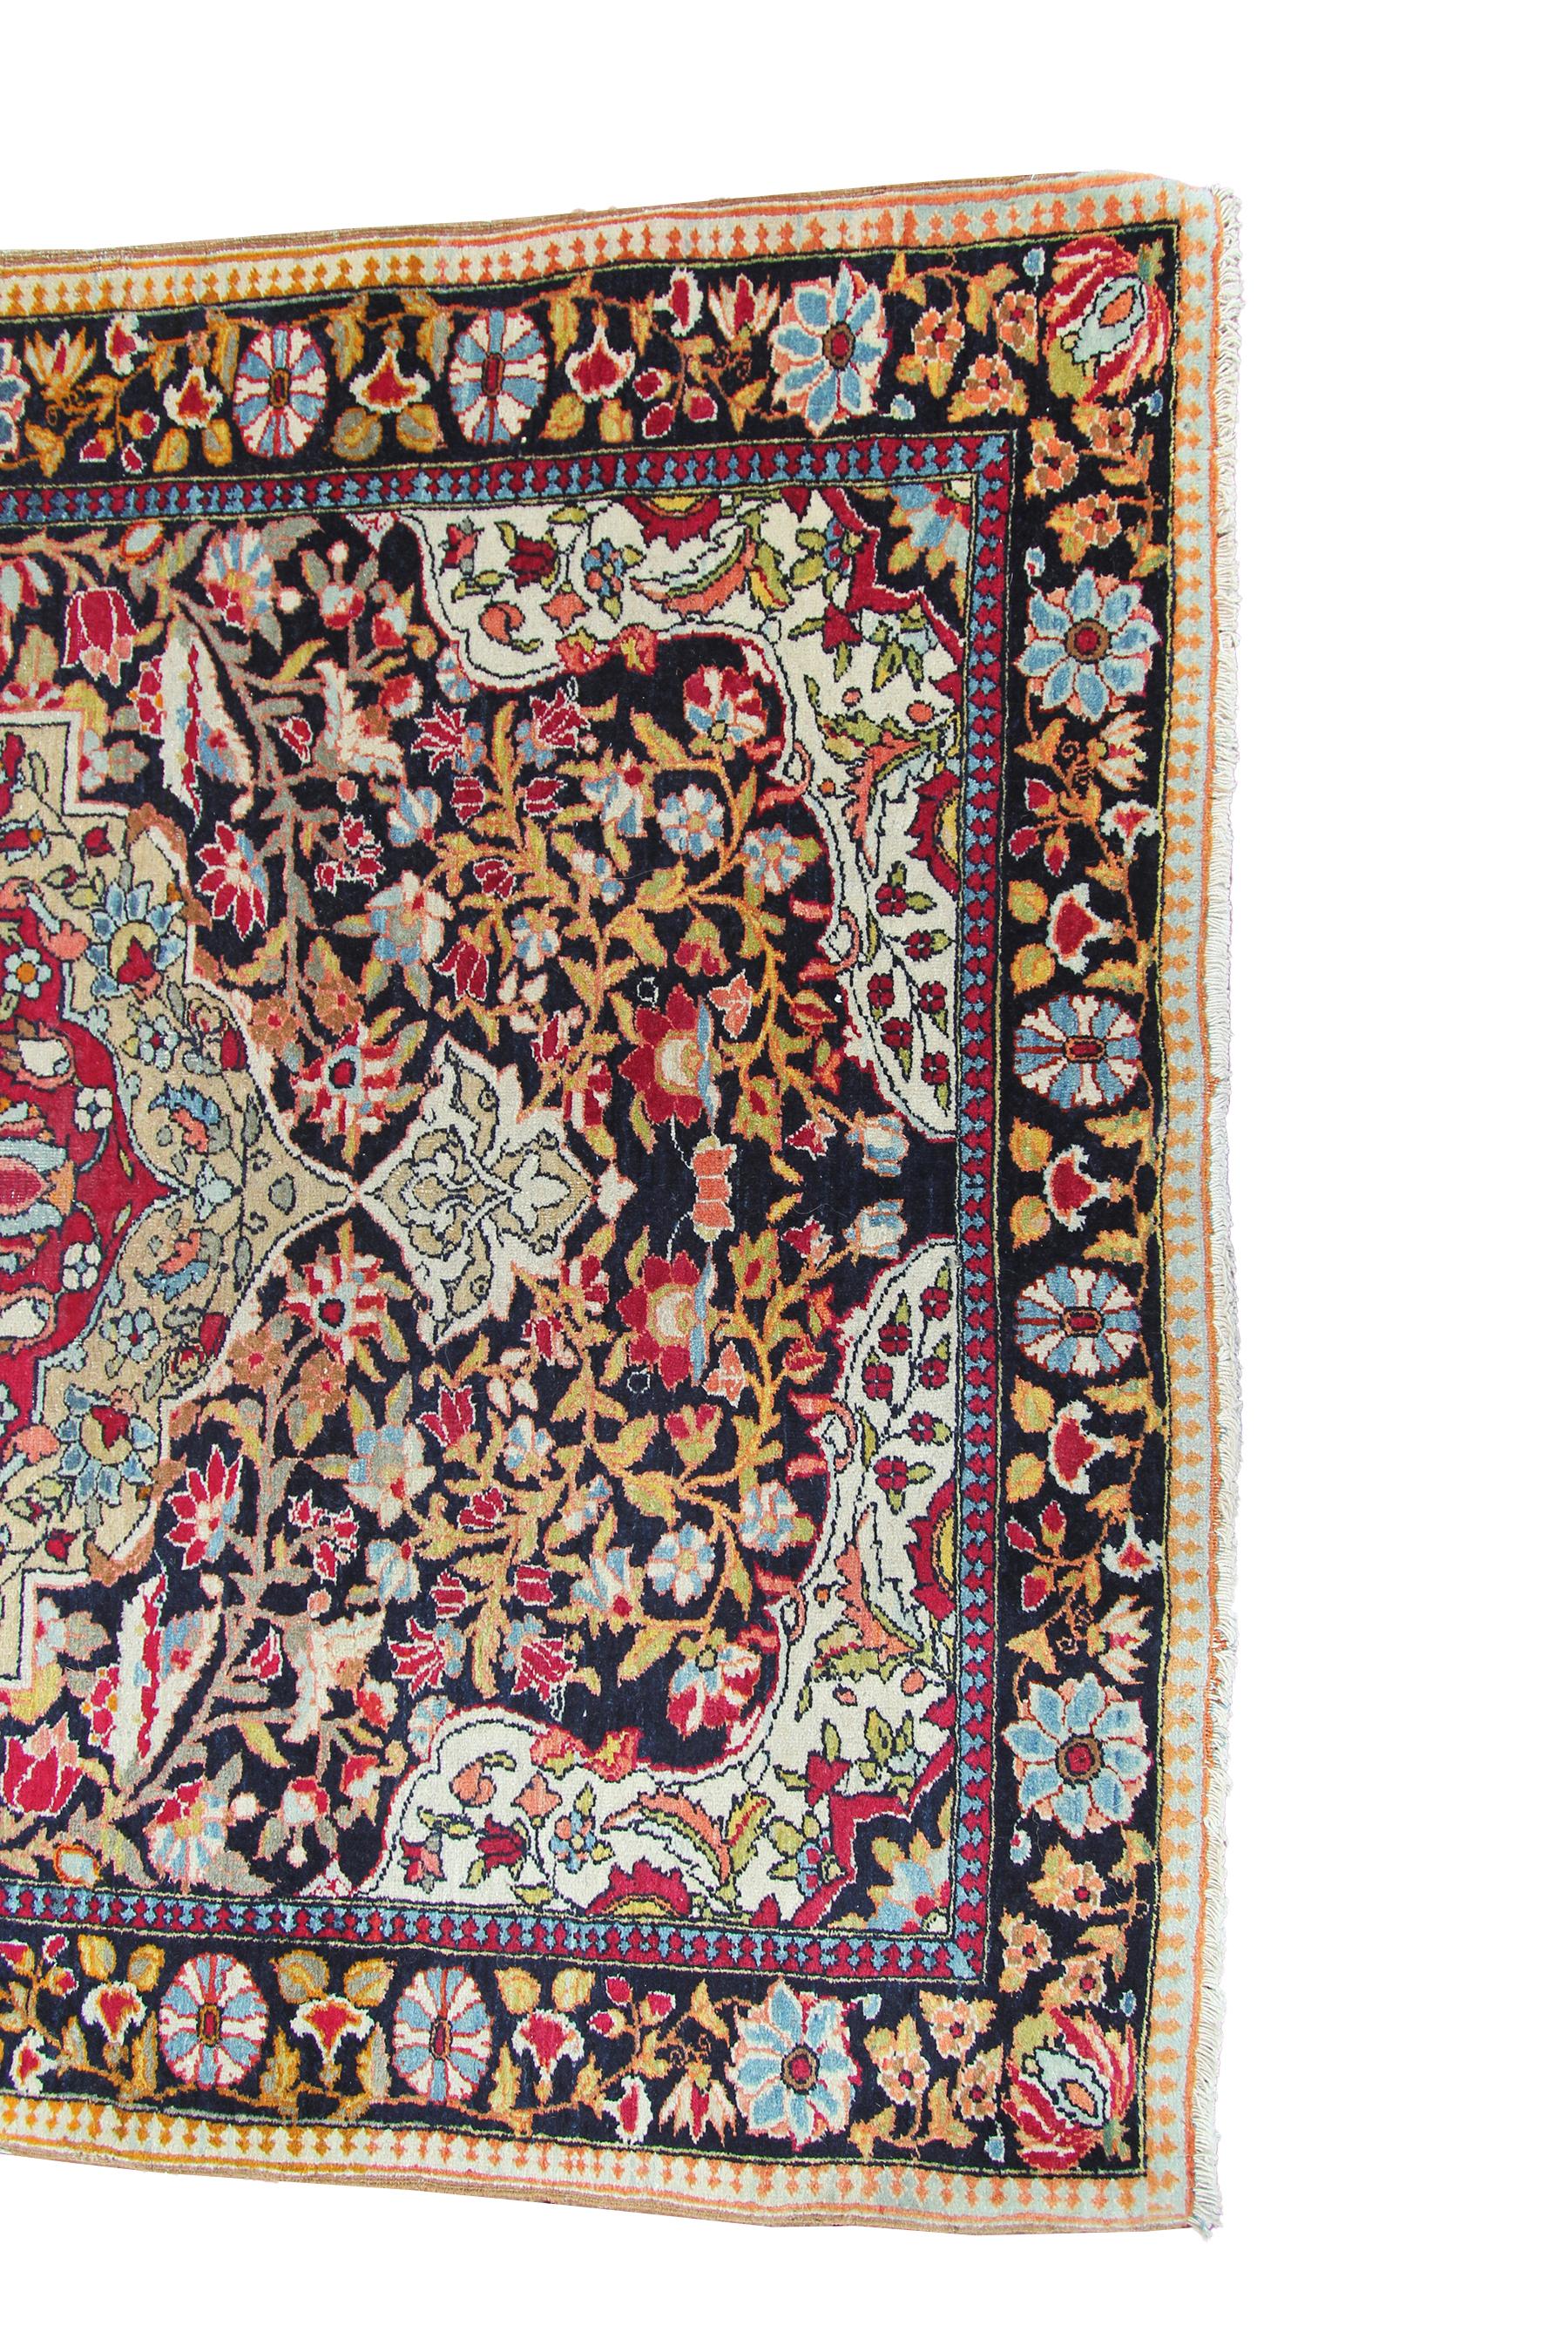 Wool Black High Quality Antique Persian Isfahan Rug Artisan Work 4x5 107x153cm For Sale